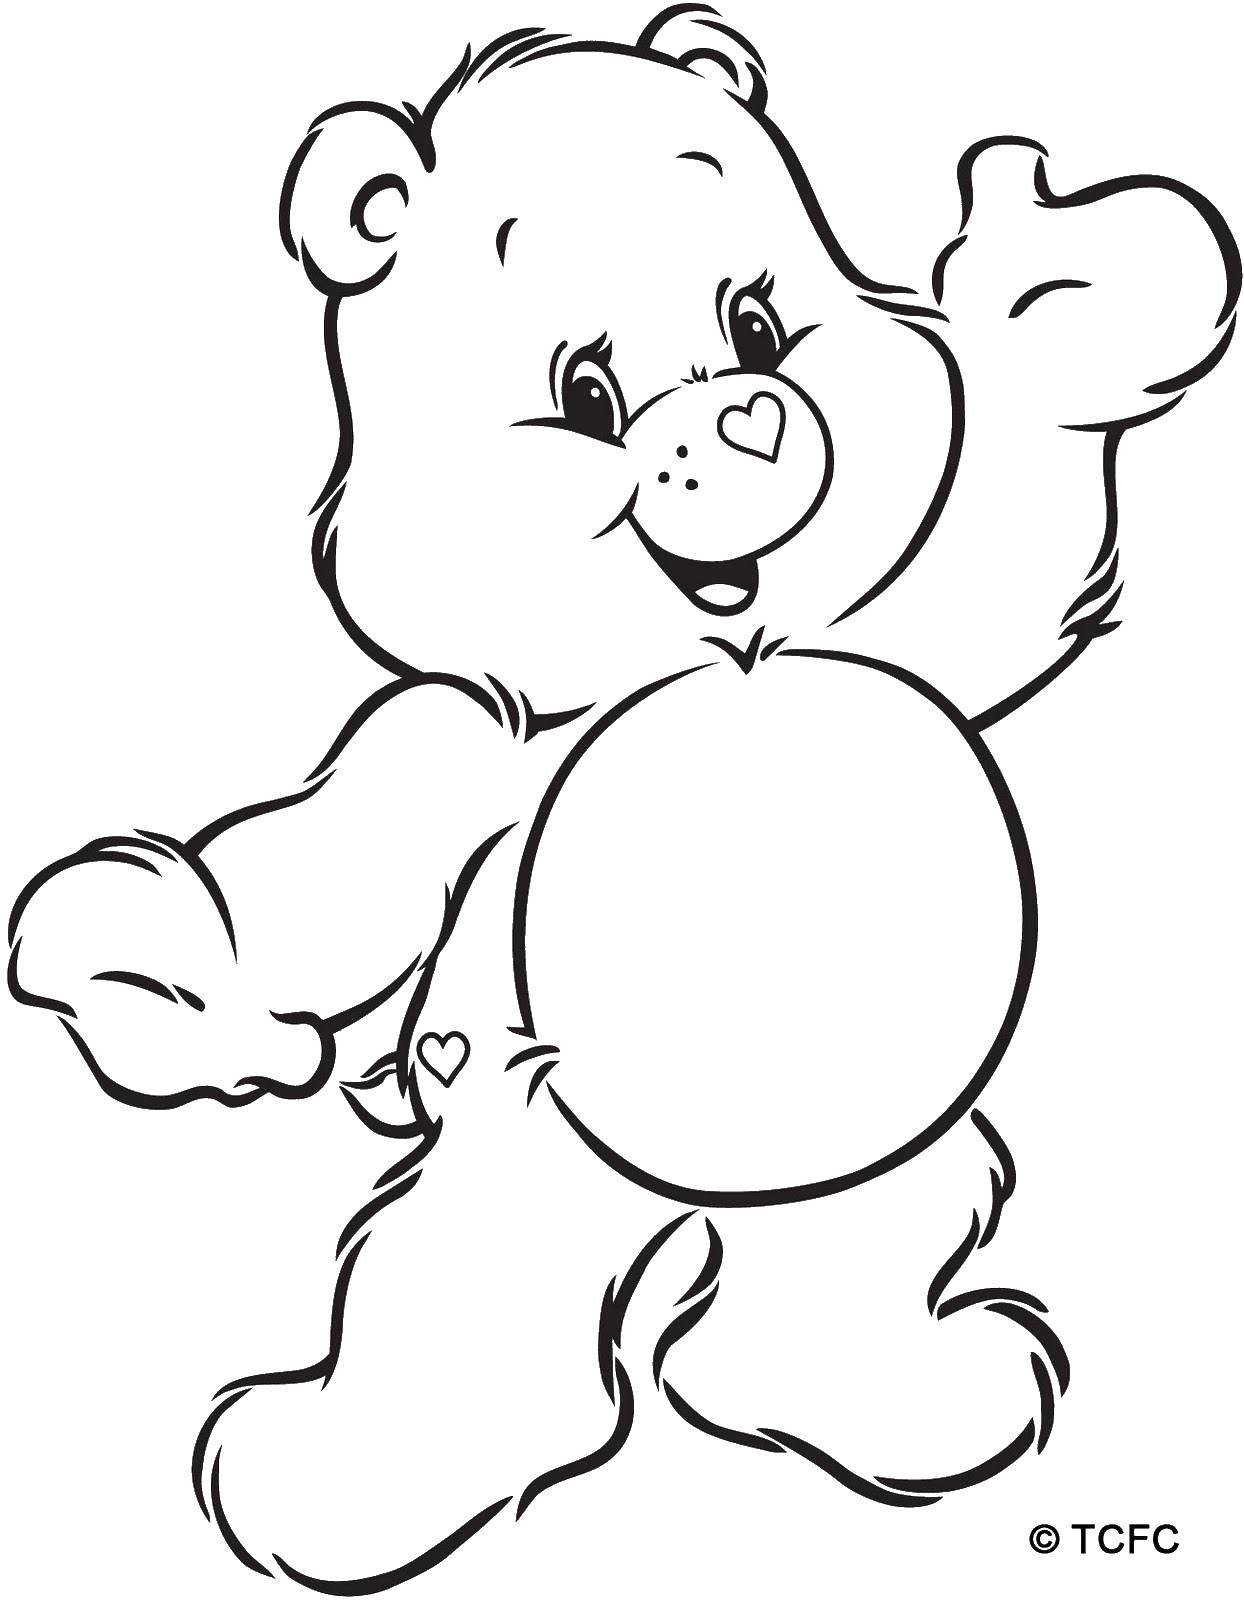 Coloring Bear with hearts. Category coloring. Tags:  bear, hearts.